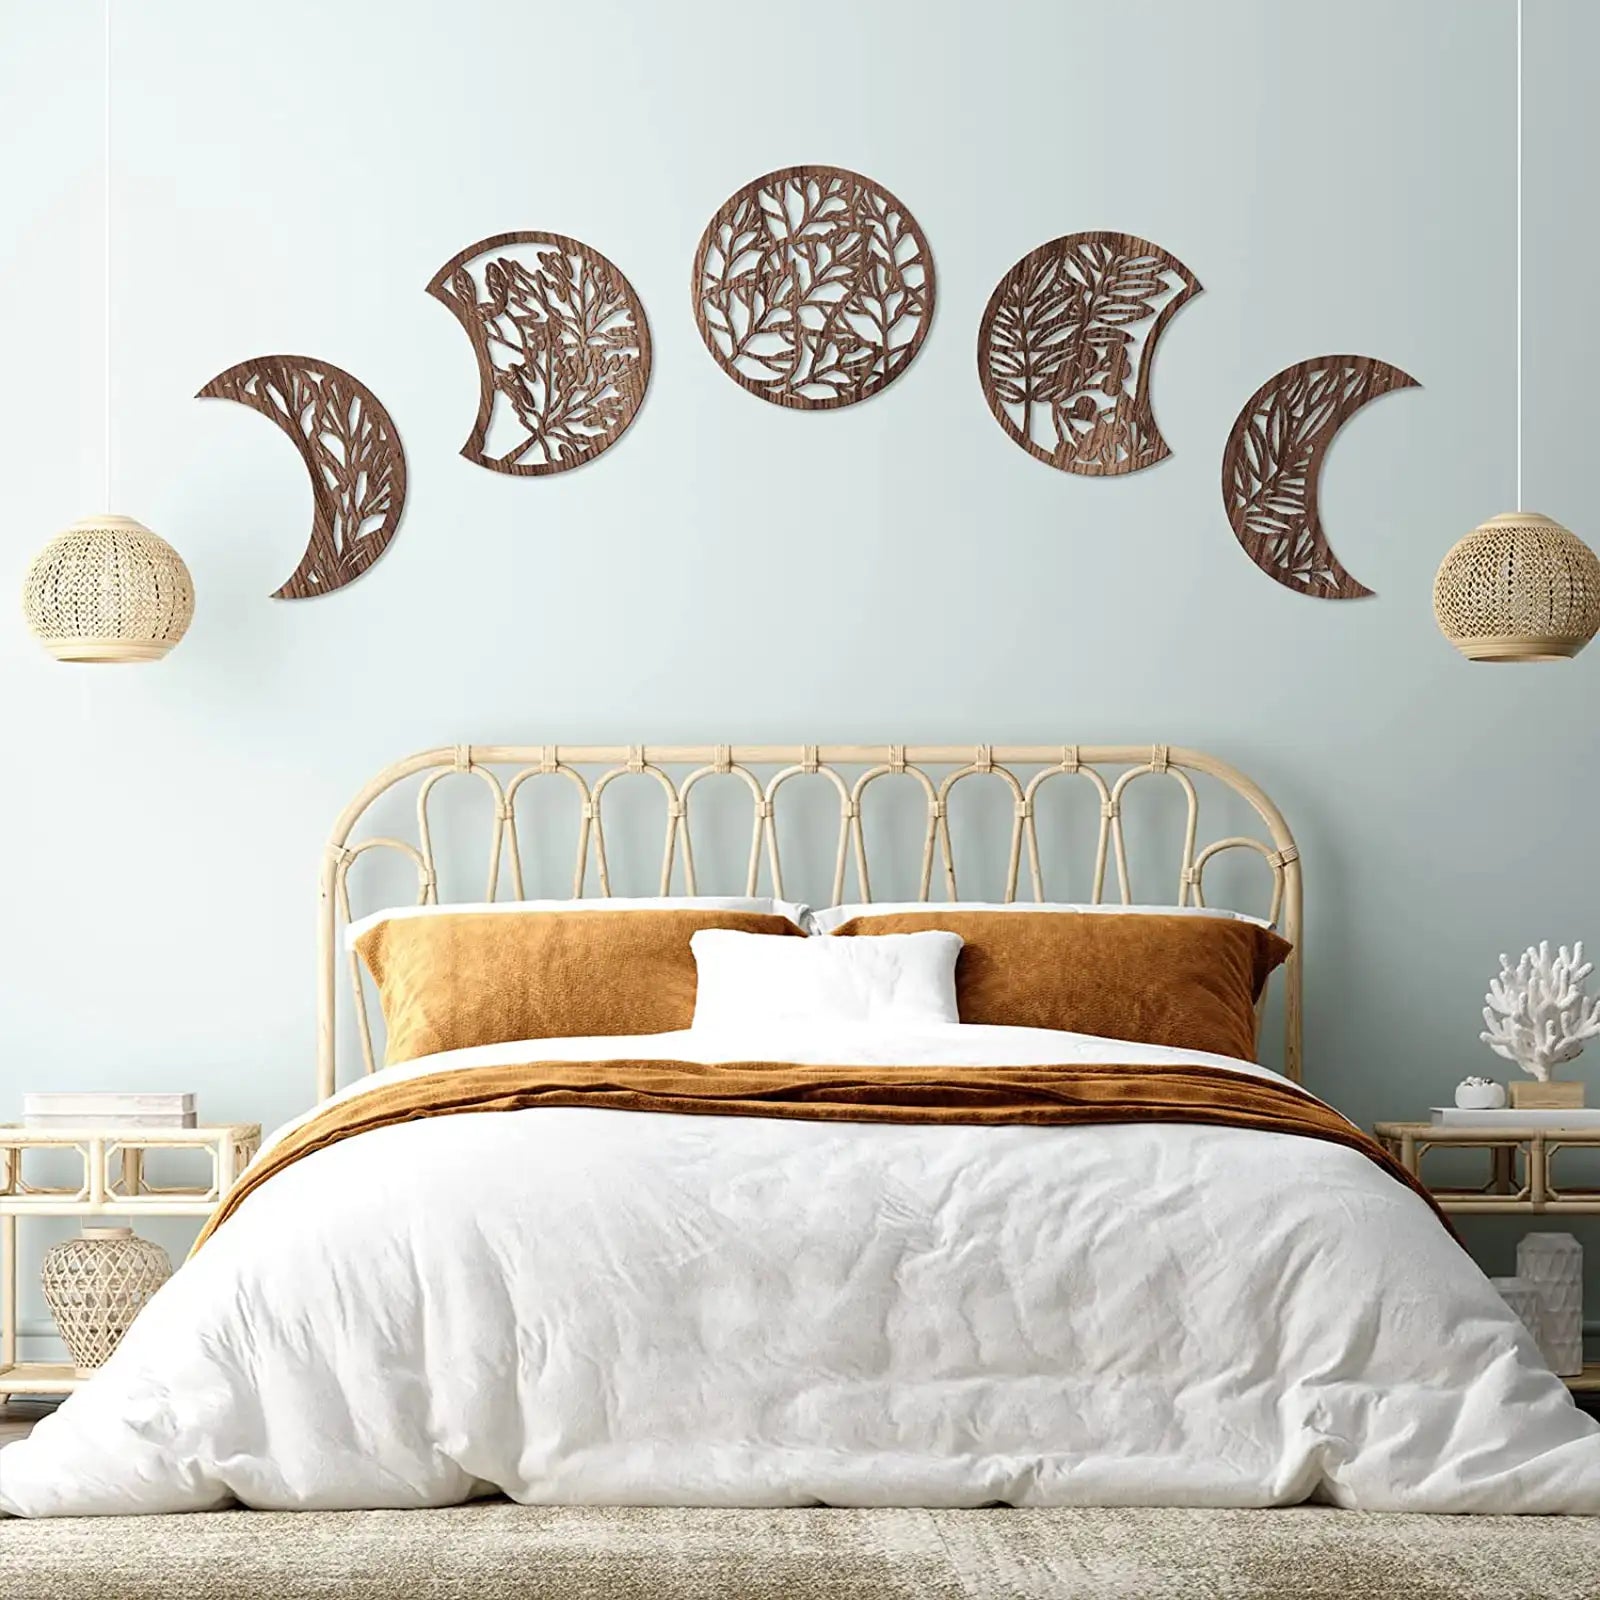 5 Pieces Moon Phase Wall Hanging Decor Wooden Moon Wall Art Decor Nordic Moon Phases Wall Art Boho Decorative Moon Decor for Room Bar Ornament